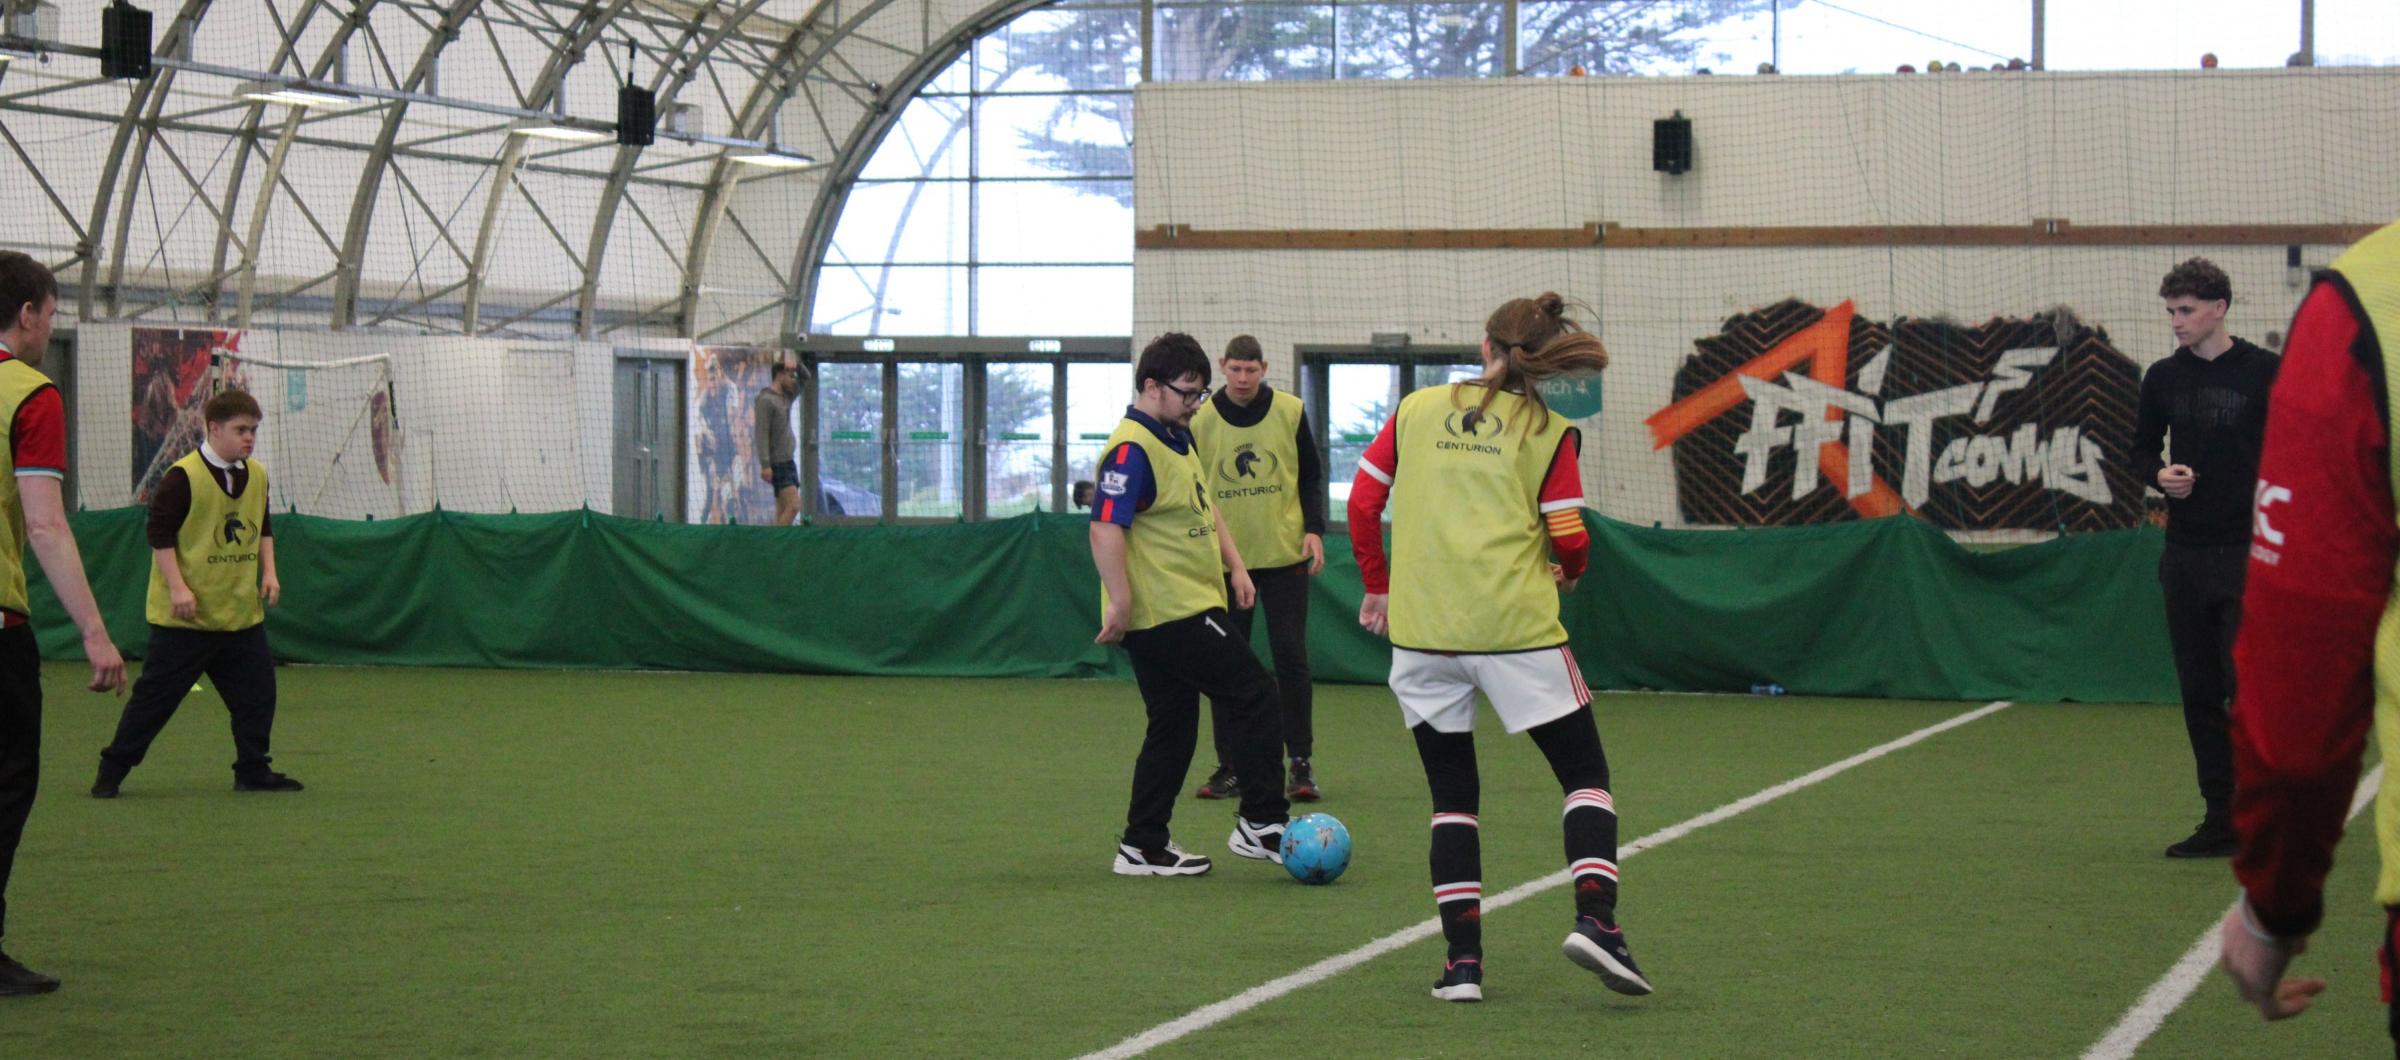 Coleg Llandrillo students at the Ability Counts Football Tournament at The Barn in Parc Eirias, Colwyn Bay